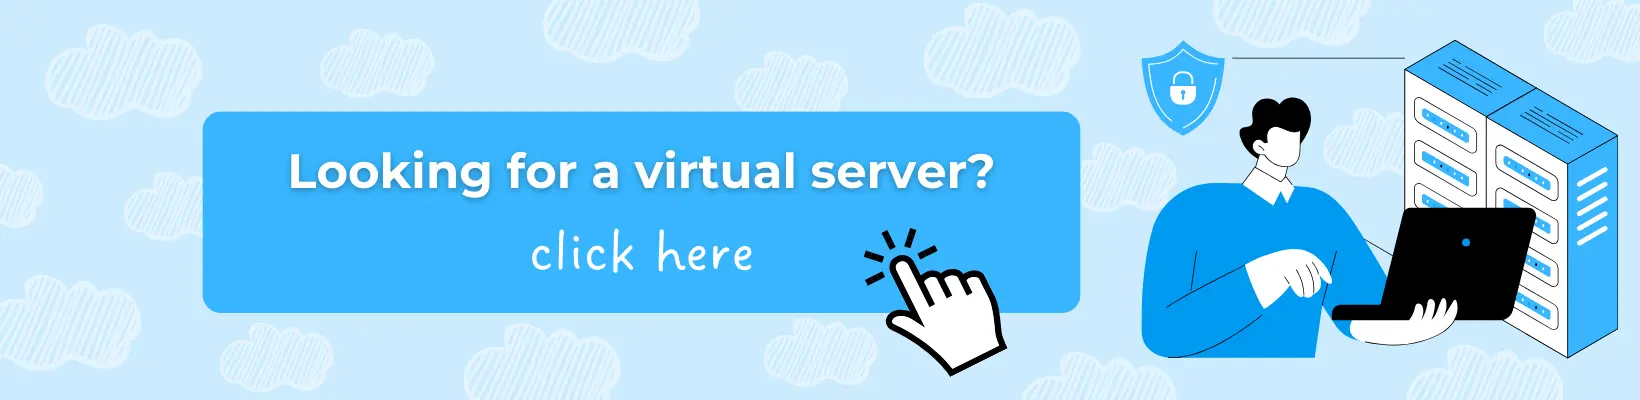 Rent a virtual server with free basic support